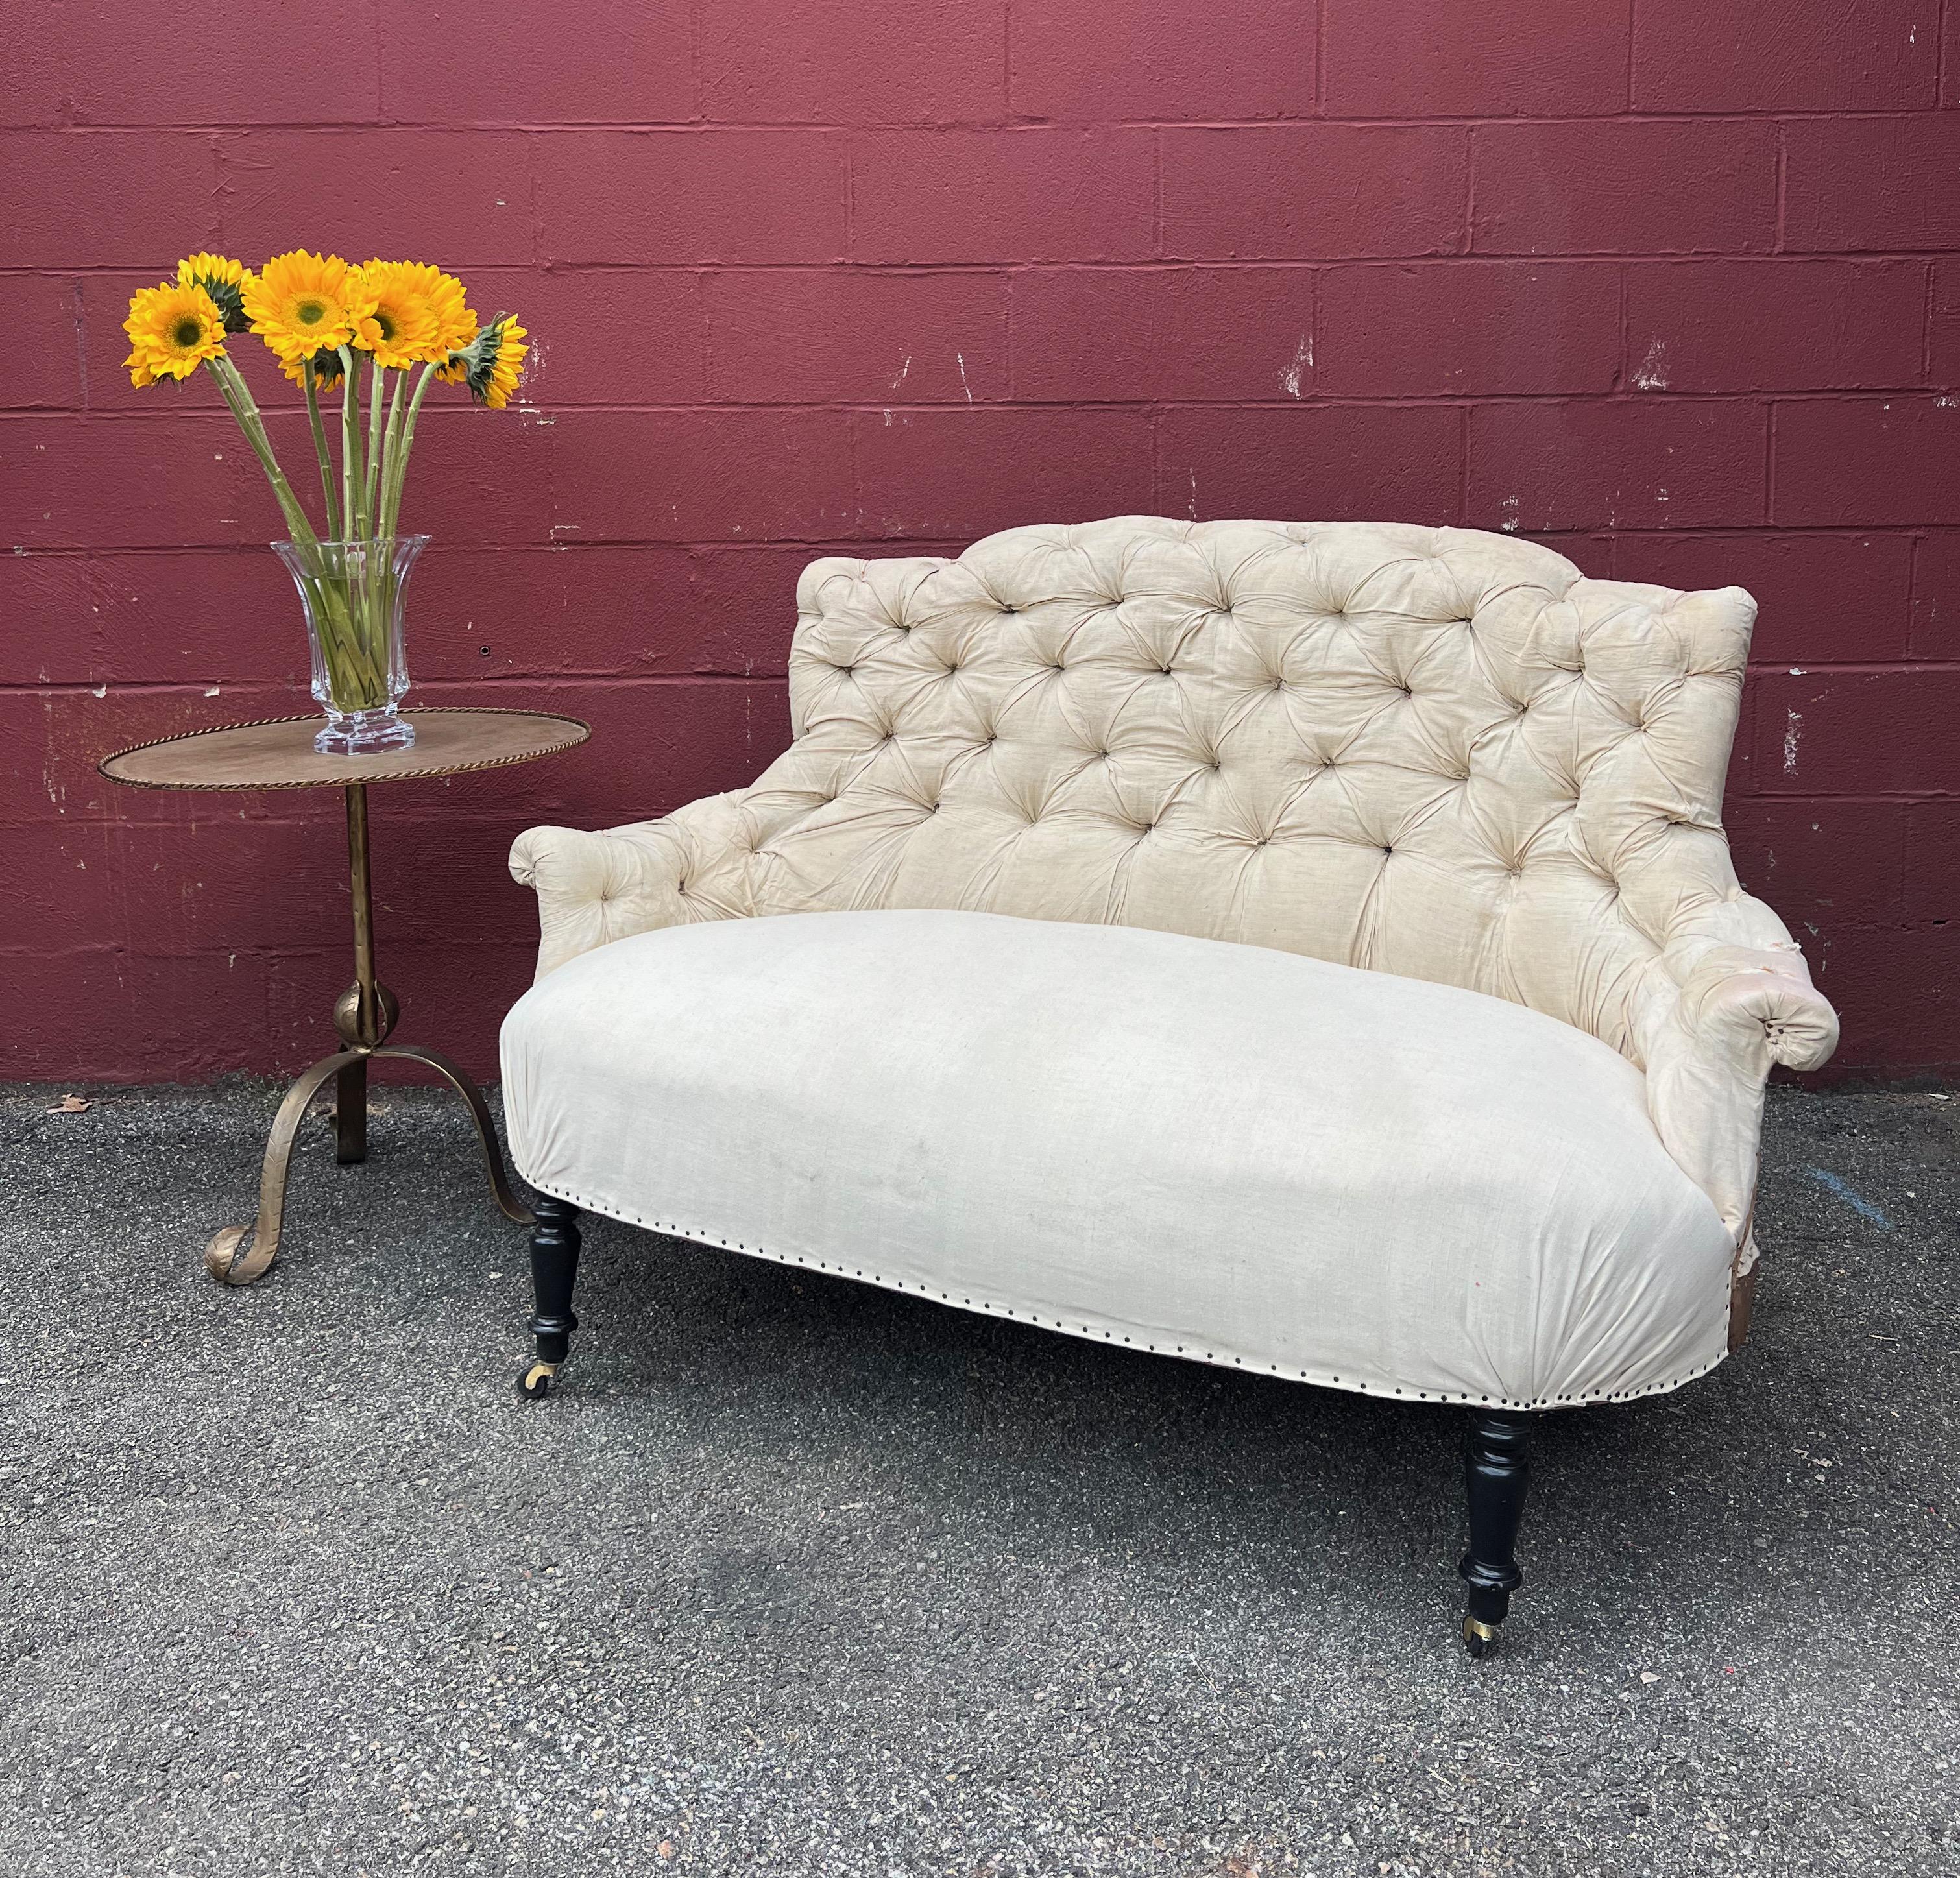 French Tufted Napoleon III Settee A wonderfully proportioned small French settee from the Napoleon III period having a gracious curved back with exquisite tufting. The settee has been stripped down to the original muslin leaving it ready for